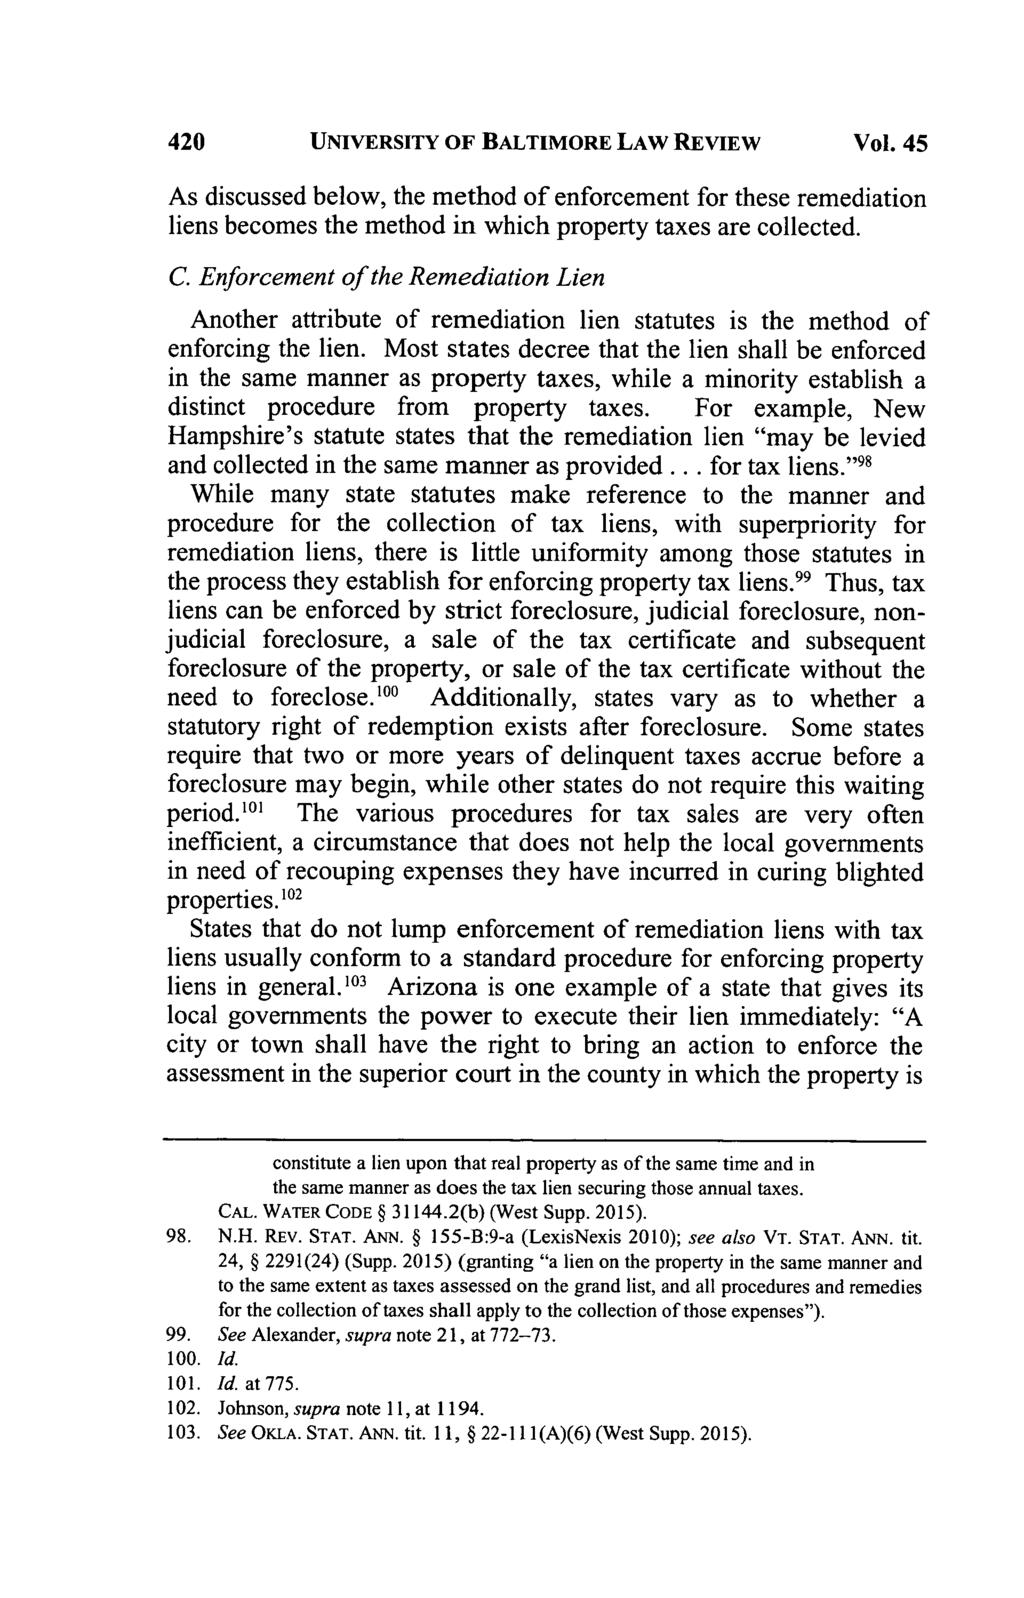 UNIVERSITY OF BALTIMORE LAW REVIEW Vol. 45 As discussed below, the method of enforcement for these remediation liens becomes the method in which property taxes are collected. C.